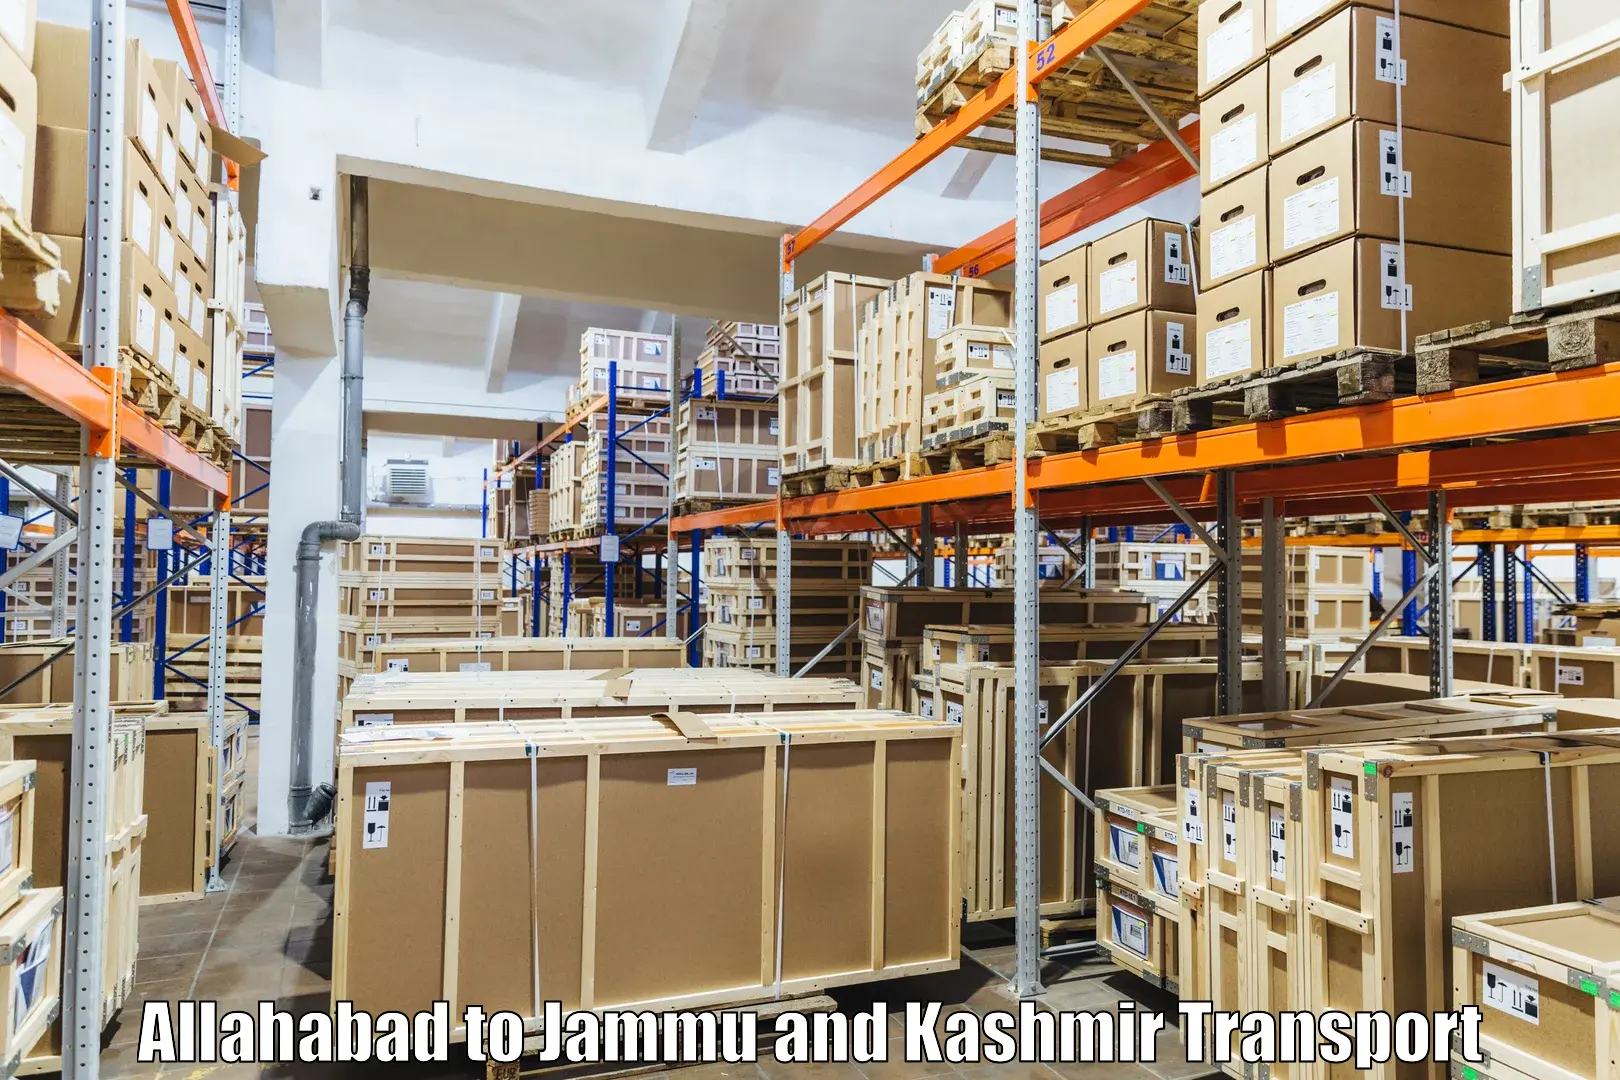 Truck transport companies in India Allahabad to Budgam